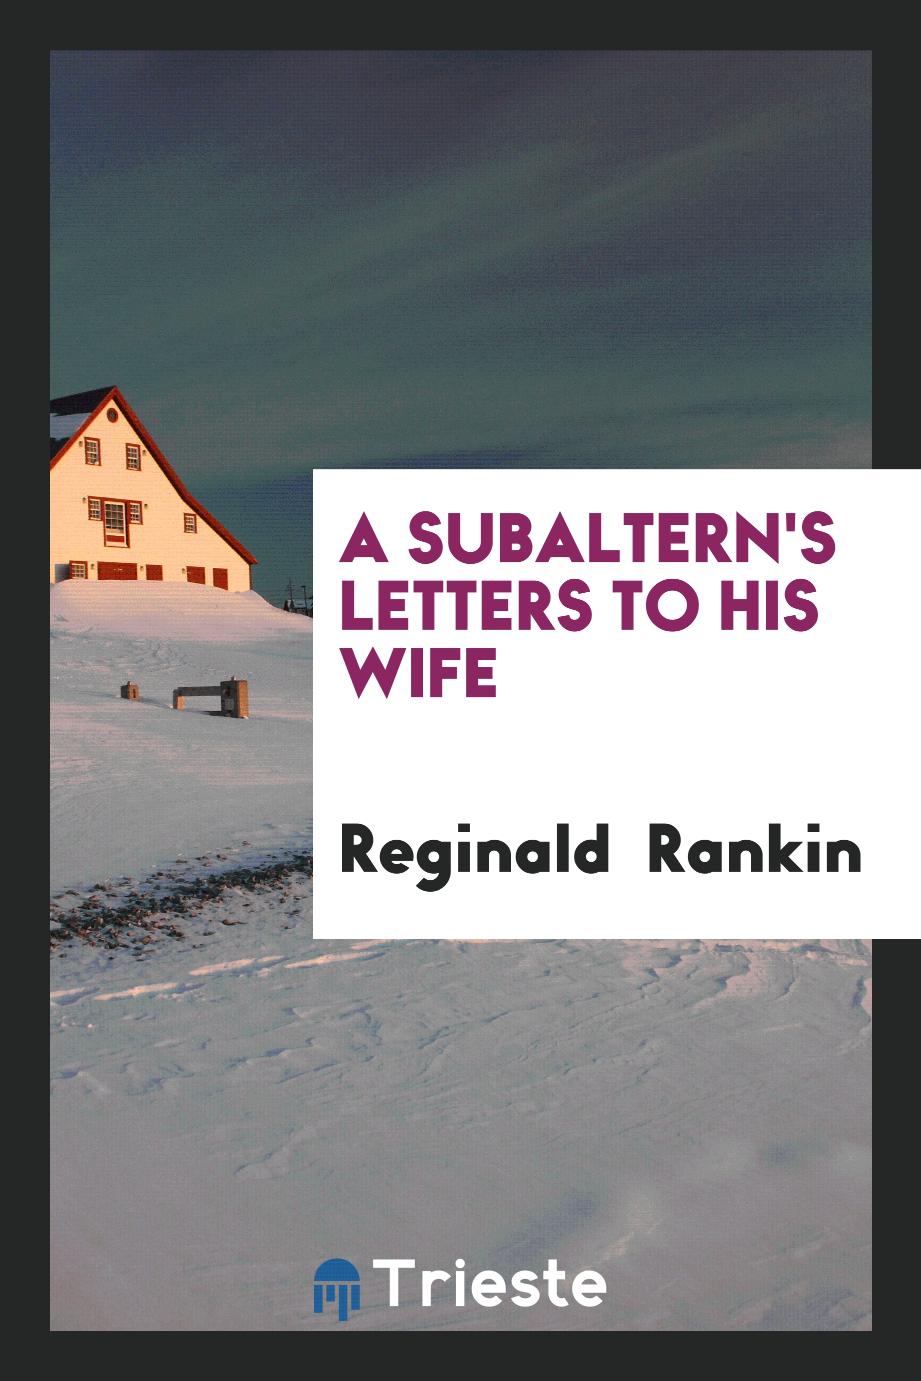 A subaltern's letters to his wife